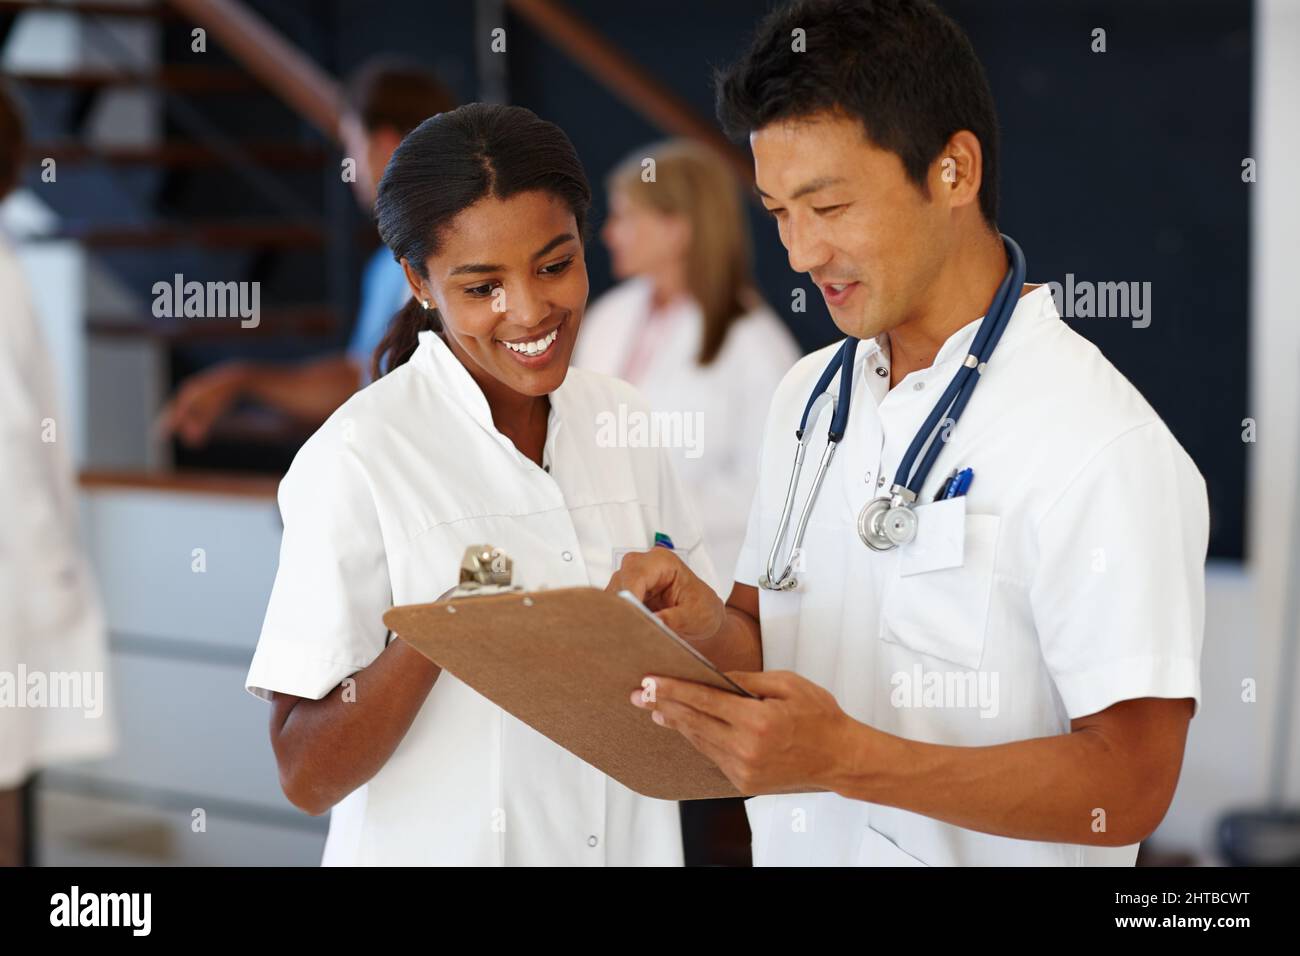 Helping others to get better is our goal. Shot of two doctors dicussing patient diagnosis. Stock Photo